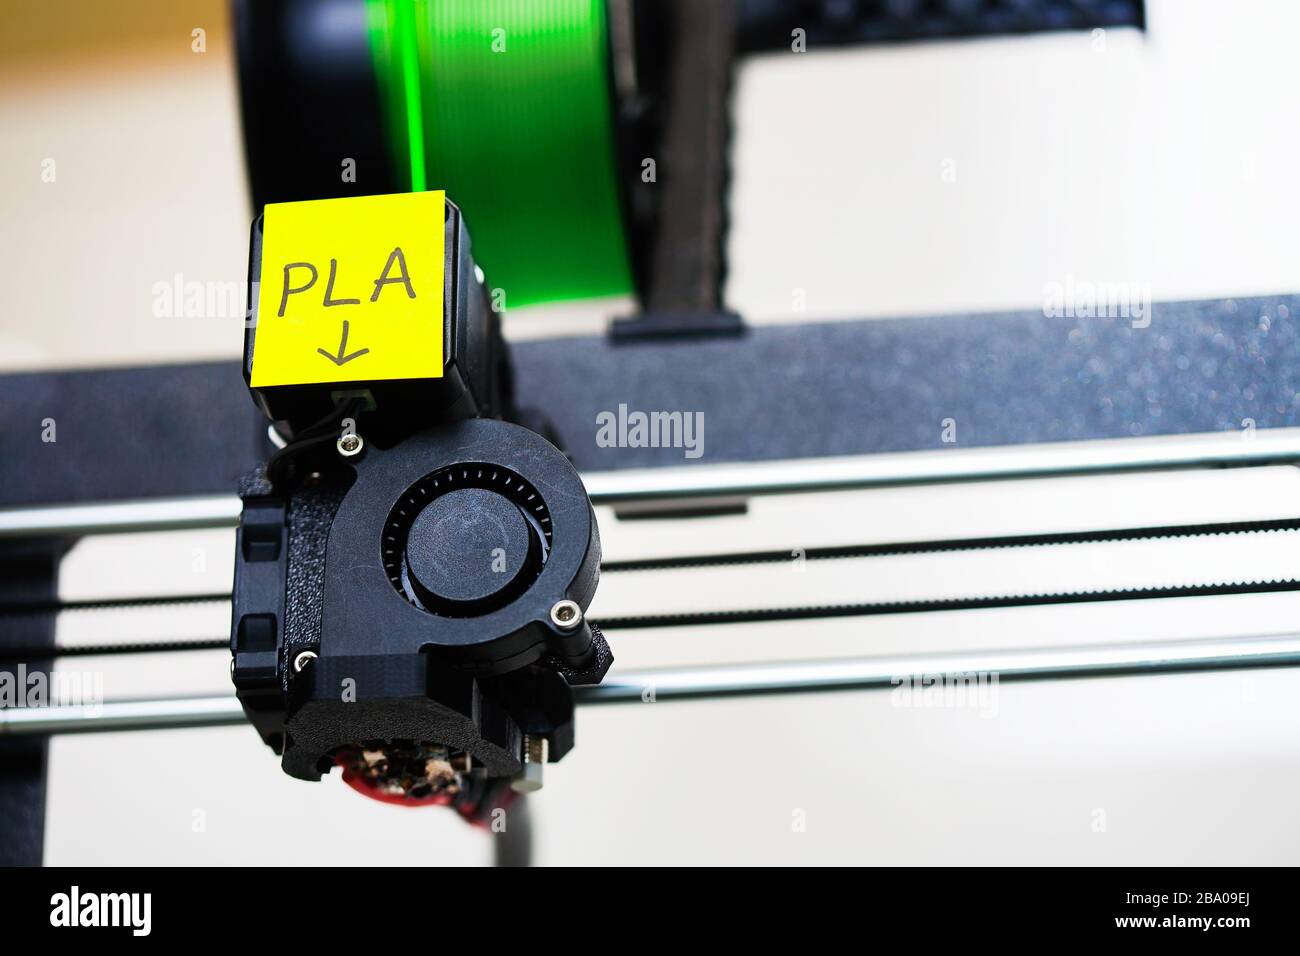 A 3d printer using PLA type filament and showing the printing head and x axis. Stock Photo